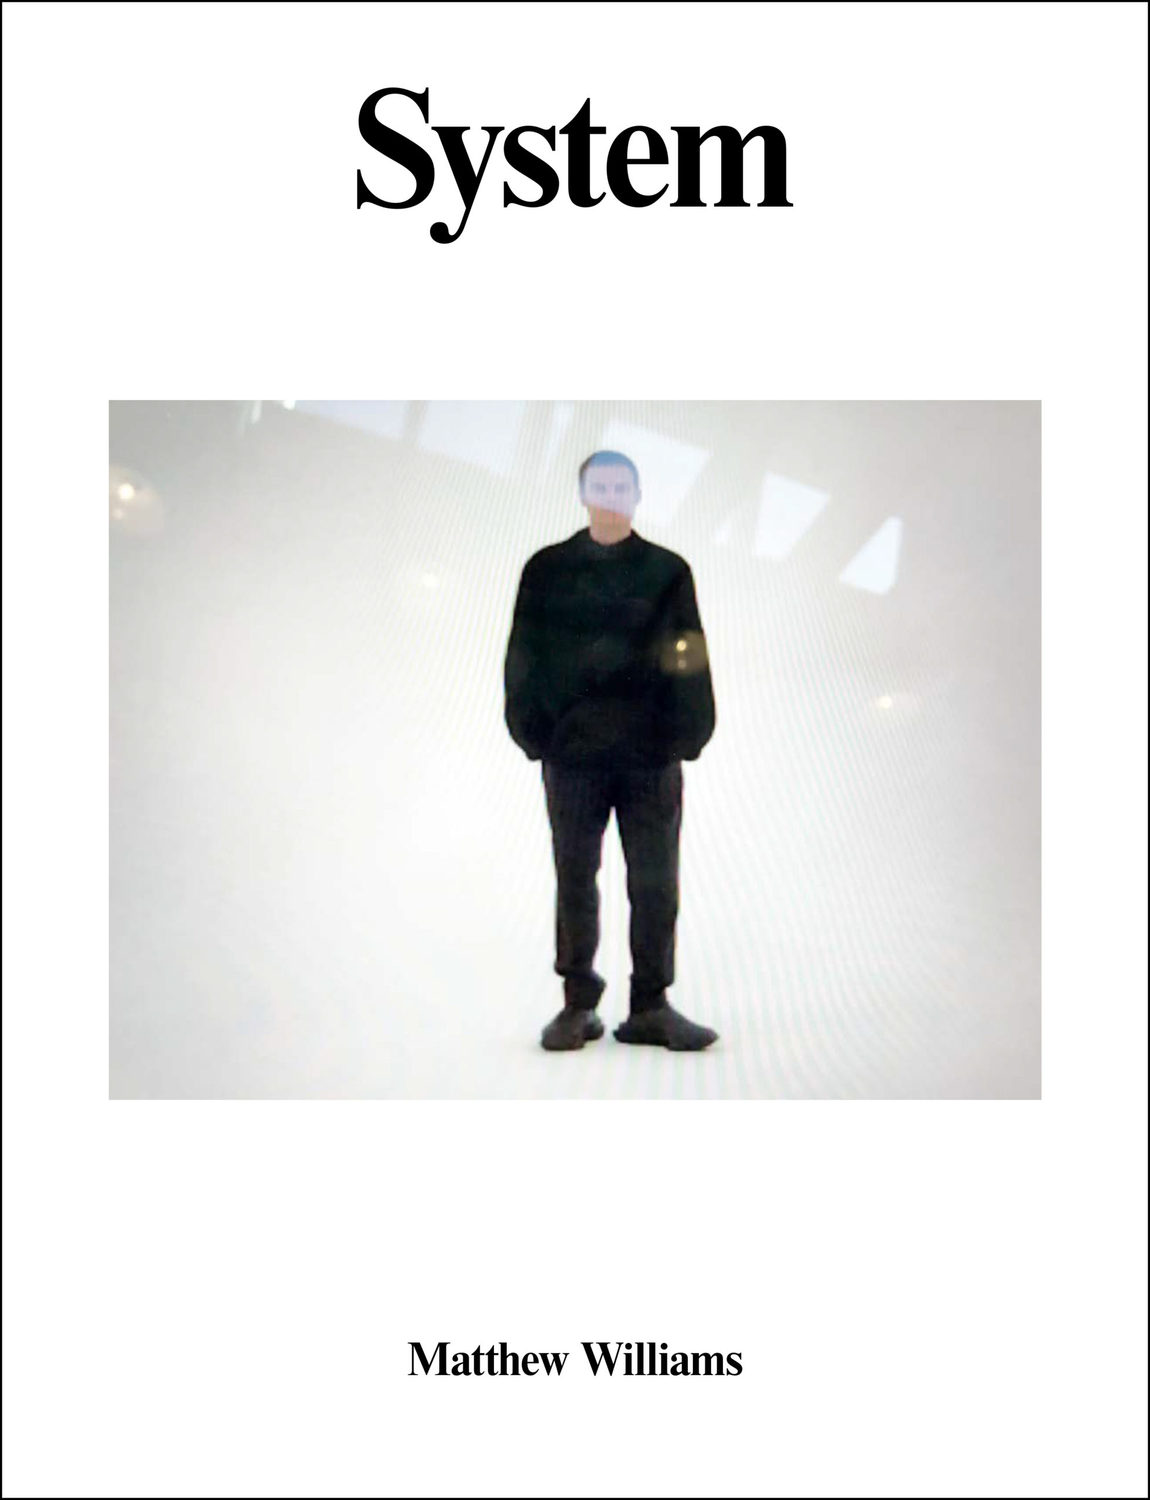 SYSTEM15-COVER-Matthew-Williams-scaled.jpg